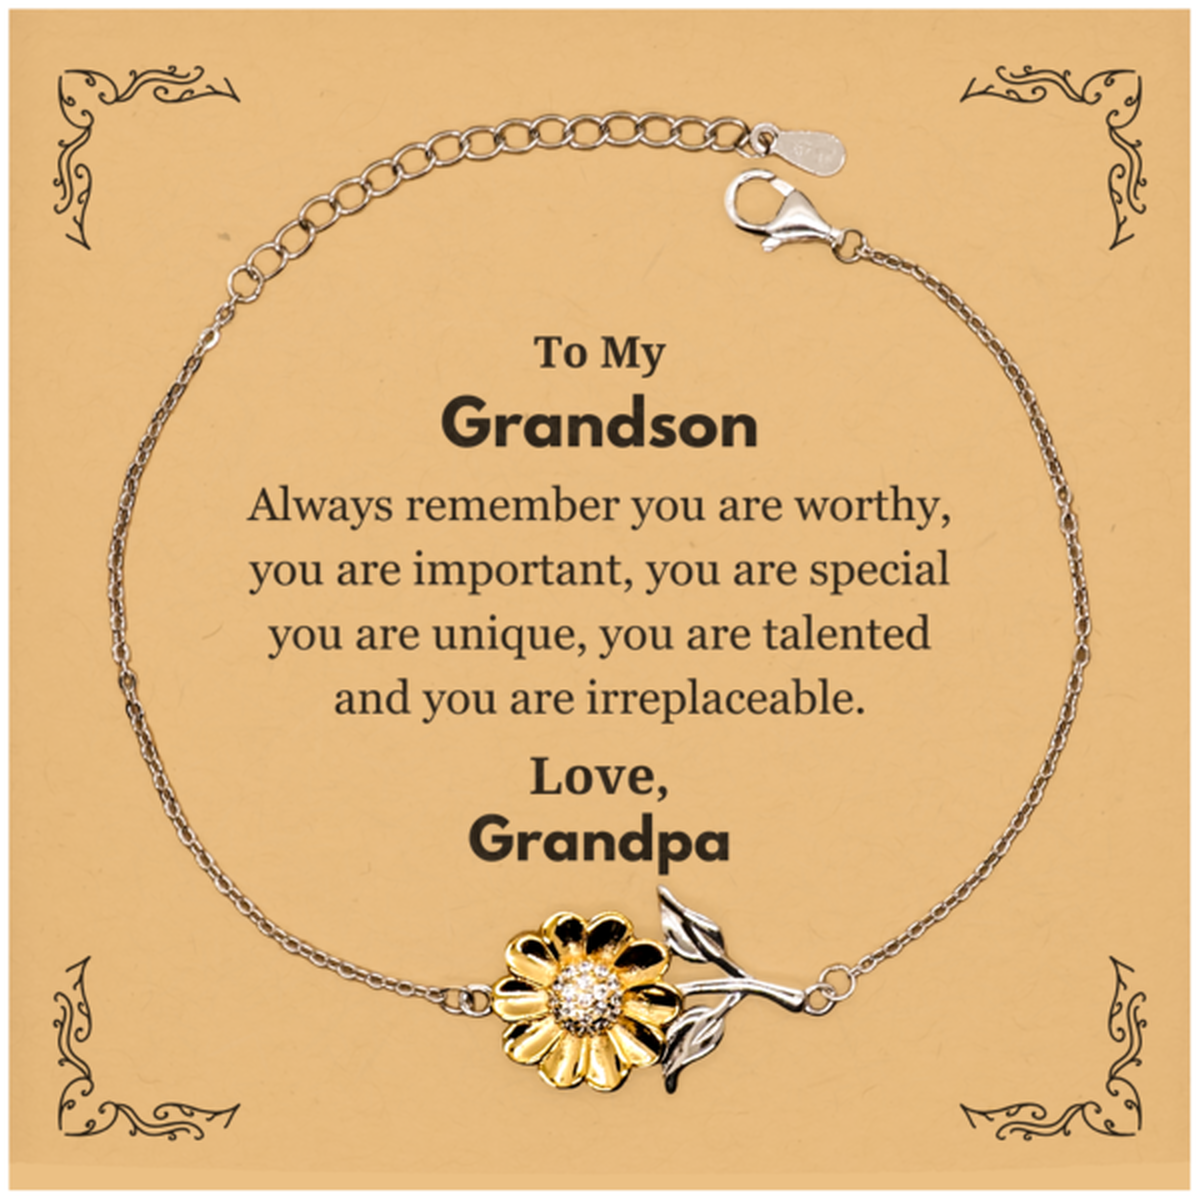 Grandson Birthday Gifts from Grandpa, Inspirational Sunflower Bracelet for Grandson Christmas Graduation Gifts for Grandson Always remember you are worthy, you are important. Love, Grandpa